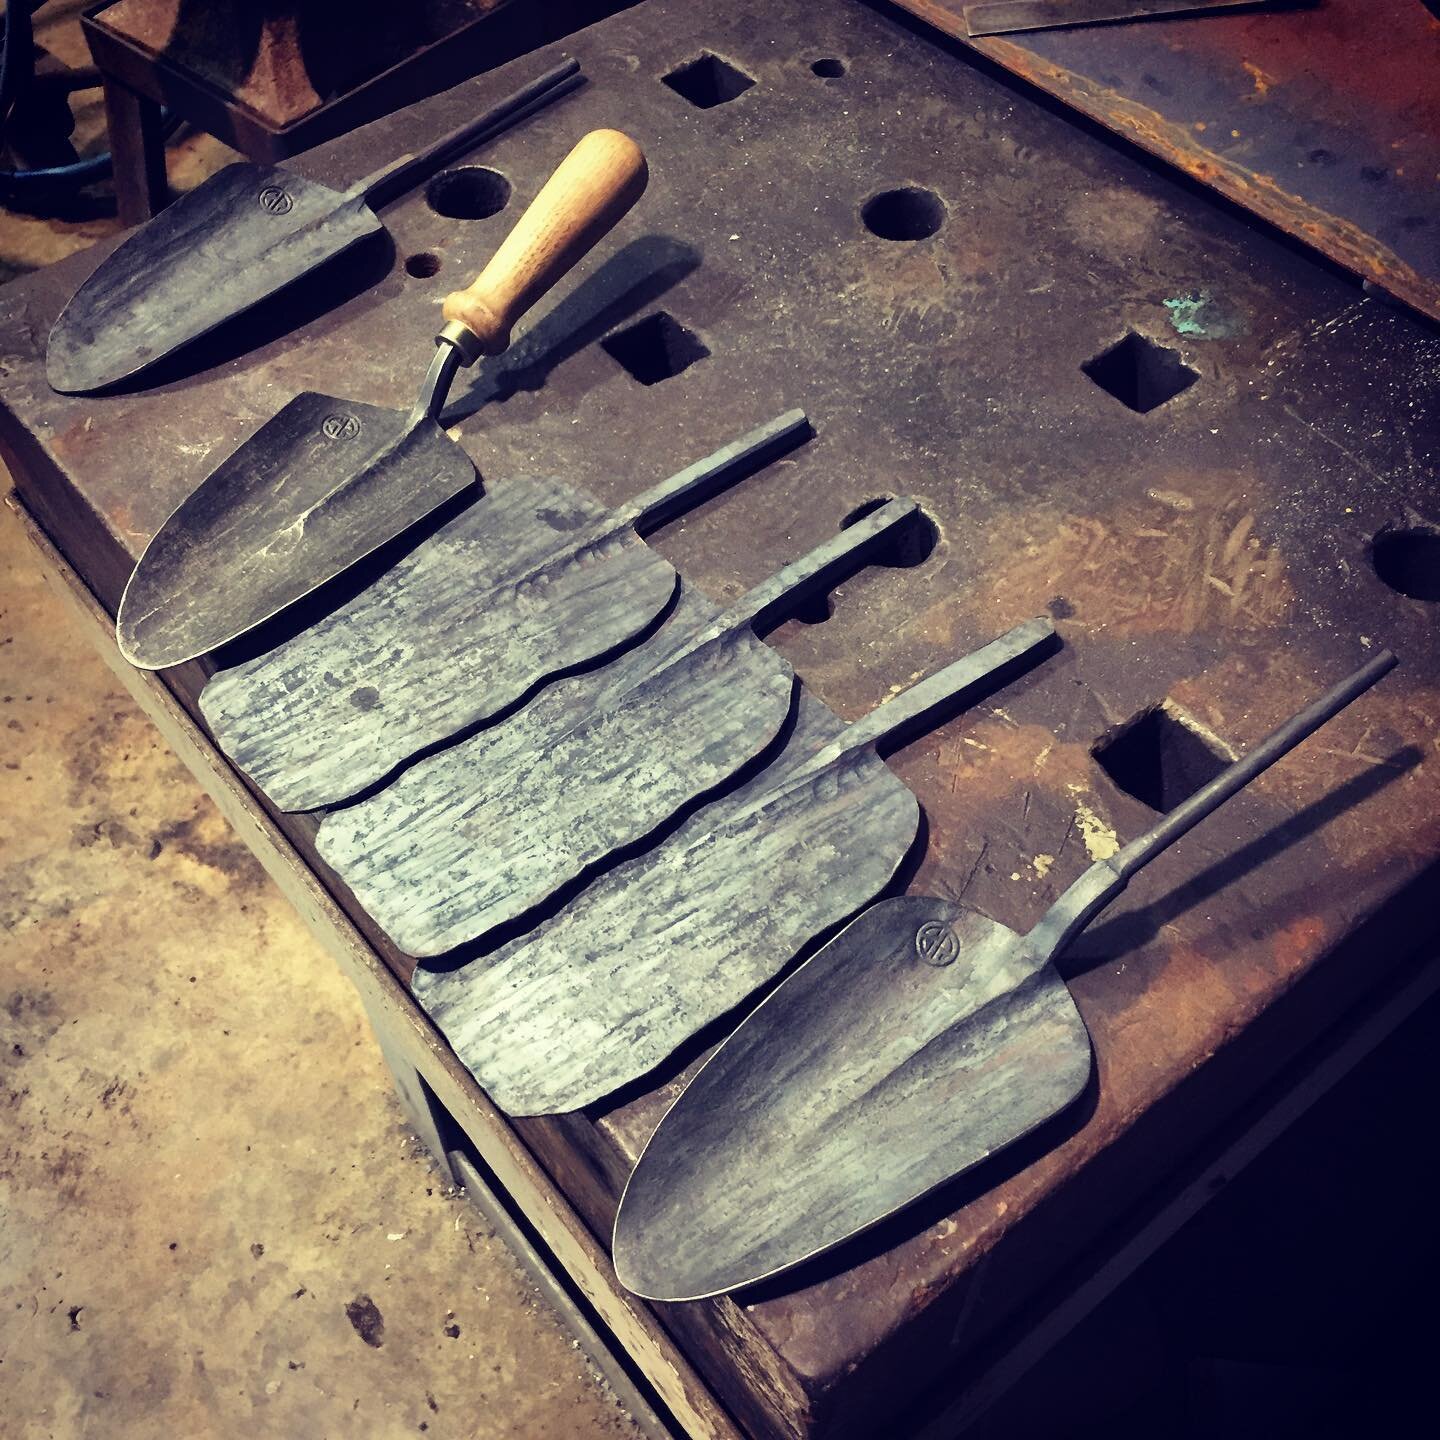 The beginnings of some stainless steel garden trowels for the Love Local event @ntnunningtonhall this Sunday. Really looking forward to seeing everyone there.

#blacksmith #forged #madeinbritain #handmade #lovelocal #shopindependent #nationaltrust #h